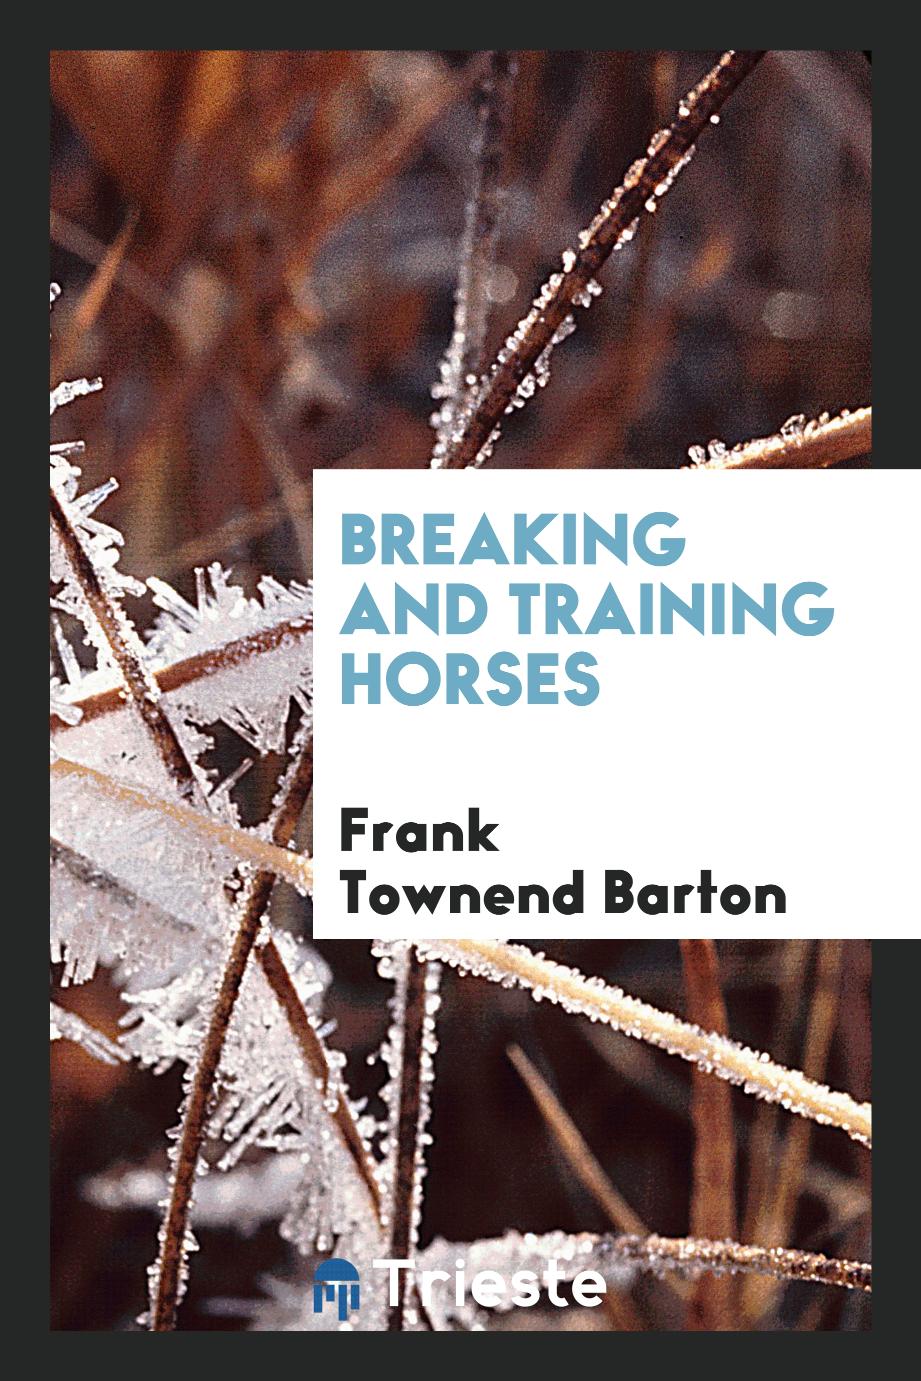 Breaking and training horses